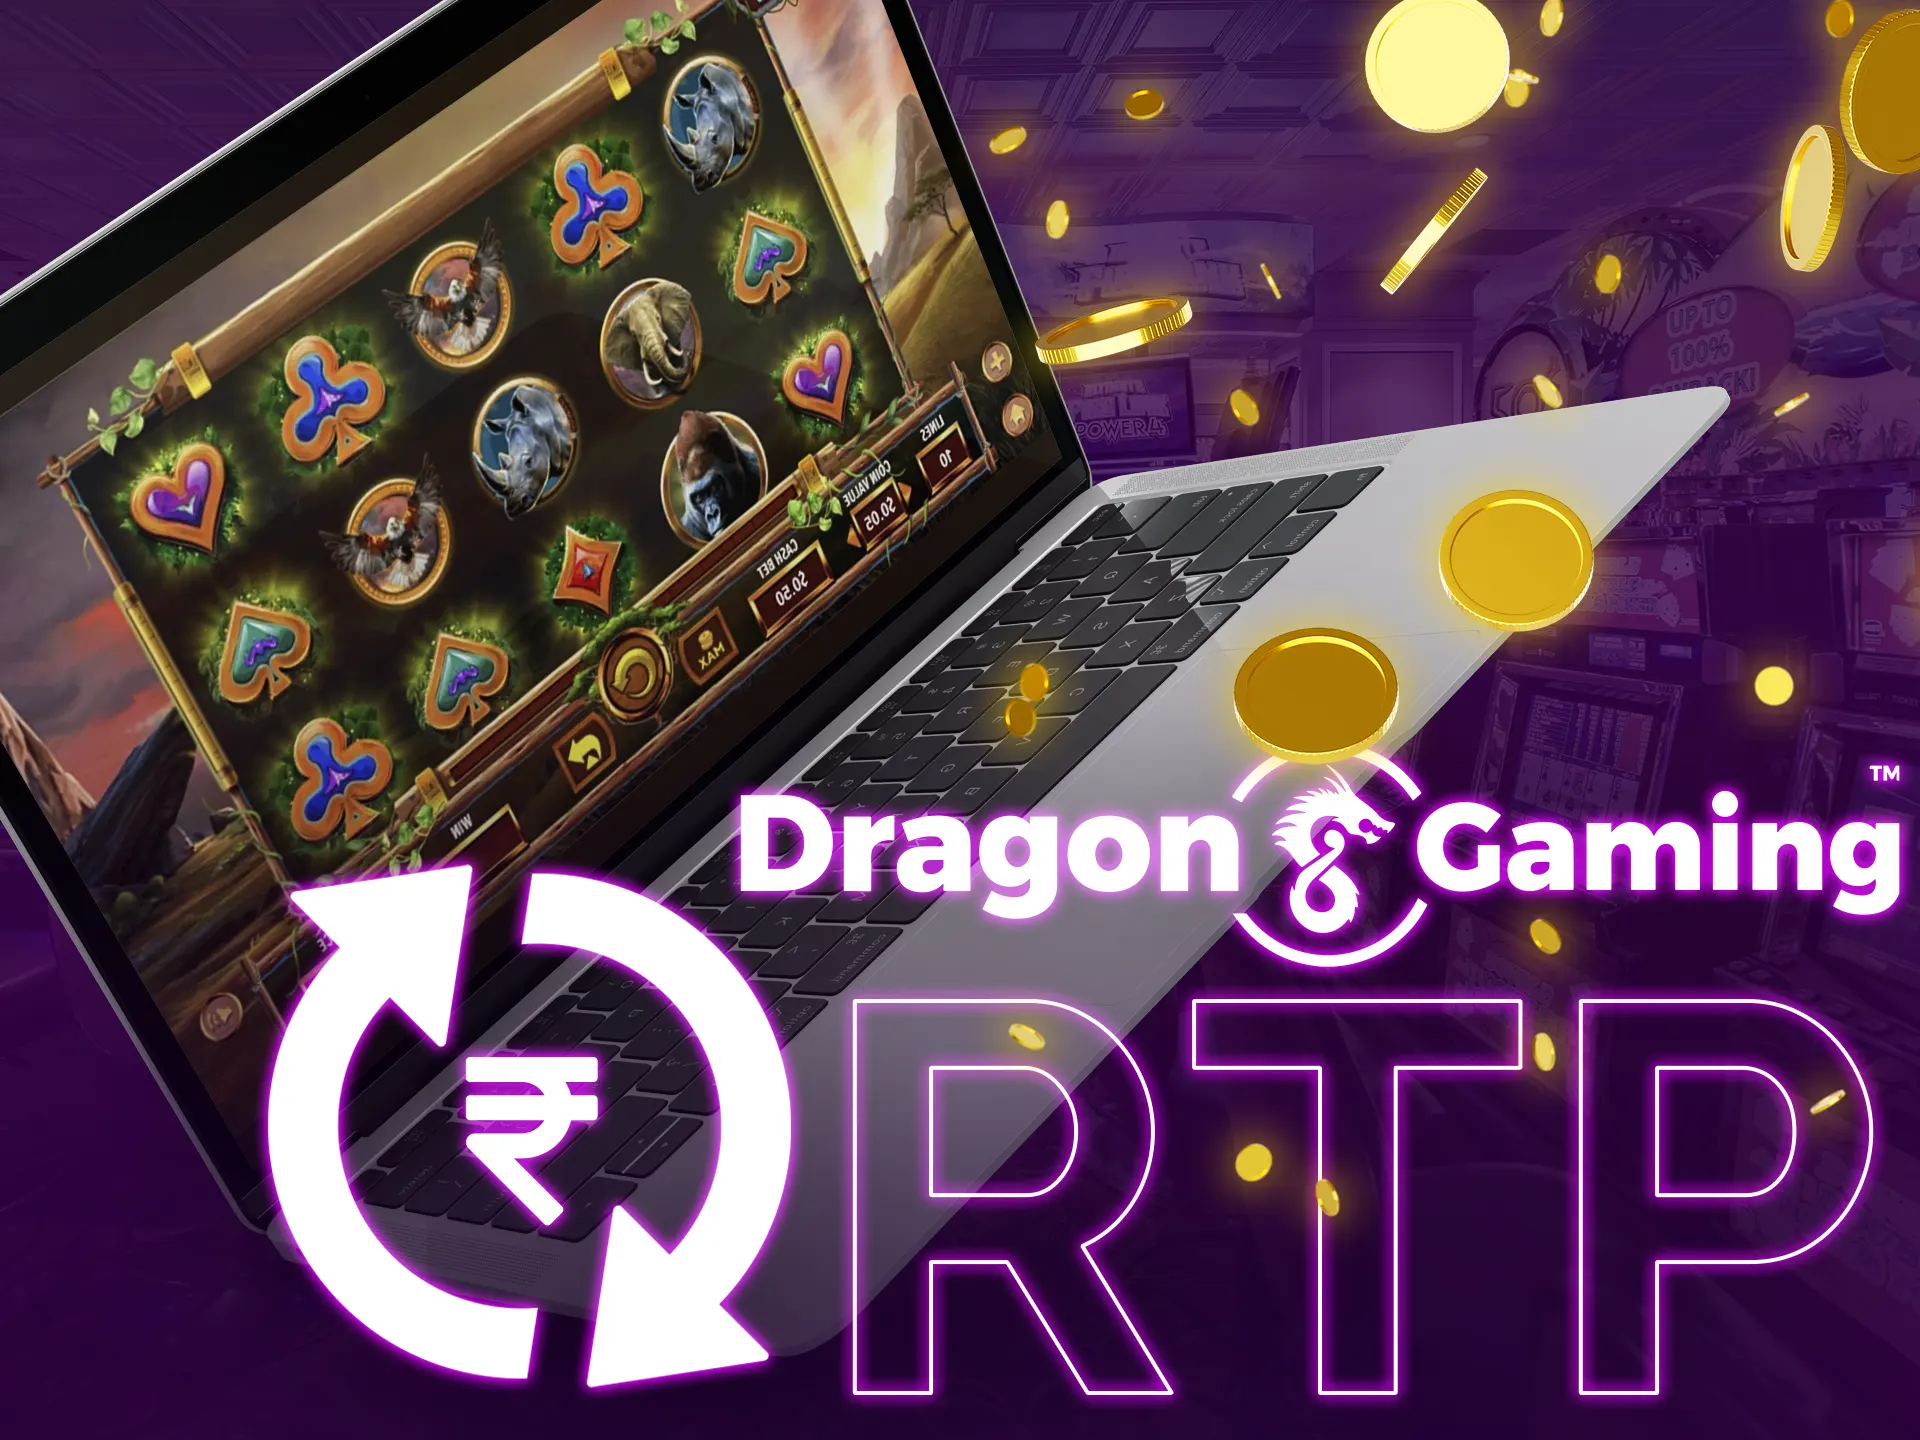 Dragon Gaming slots vary in RTP, with Legend of Horus high.